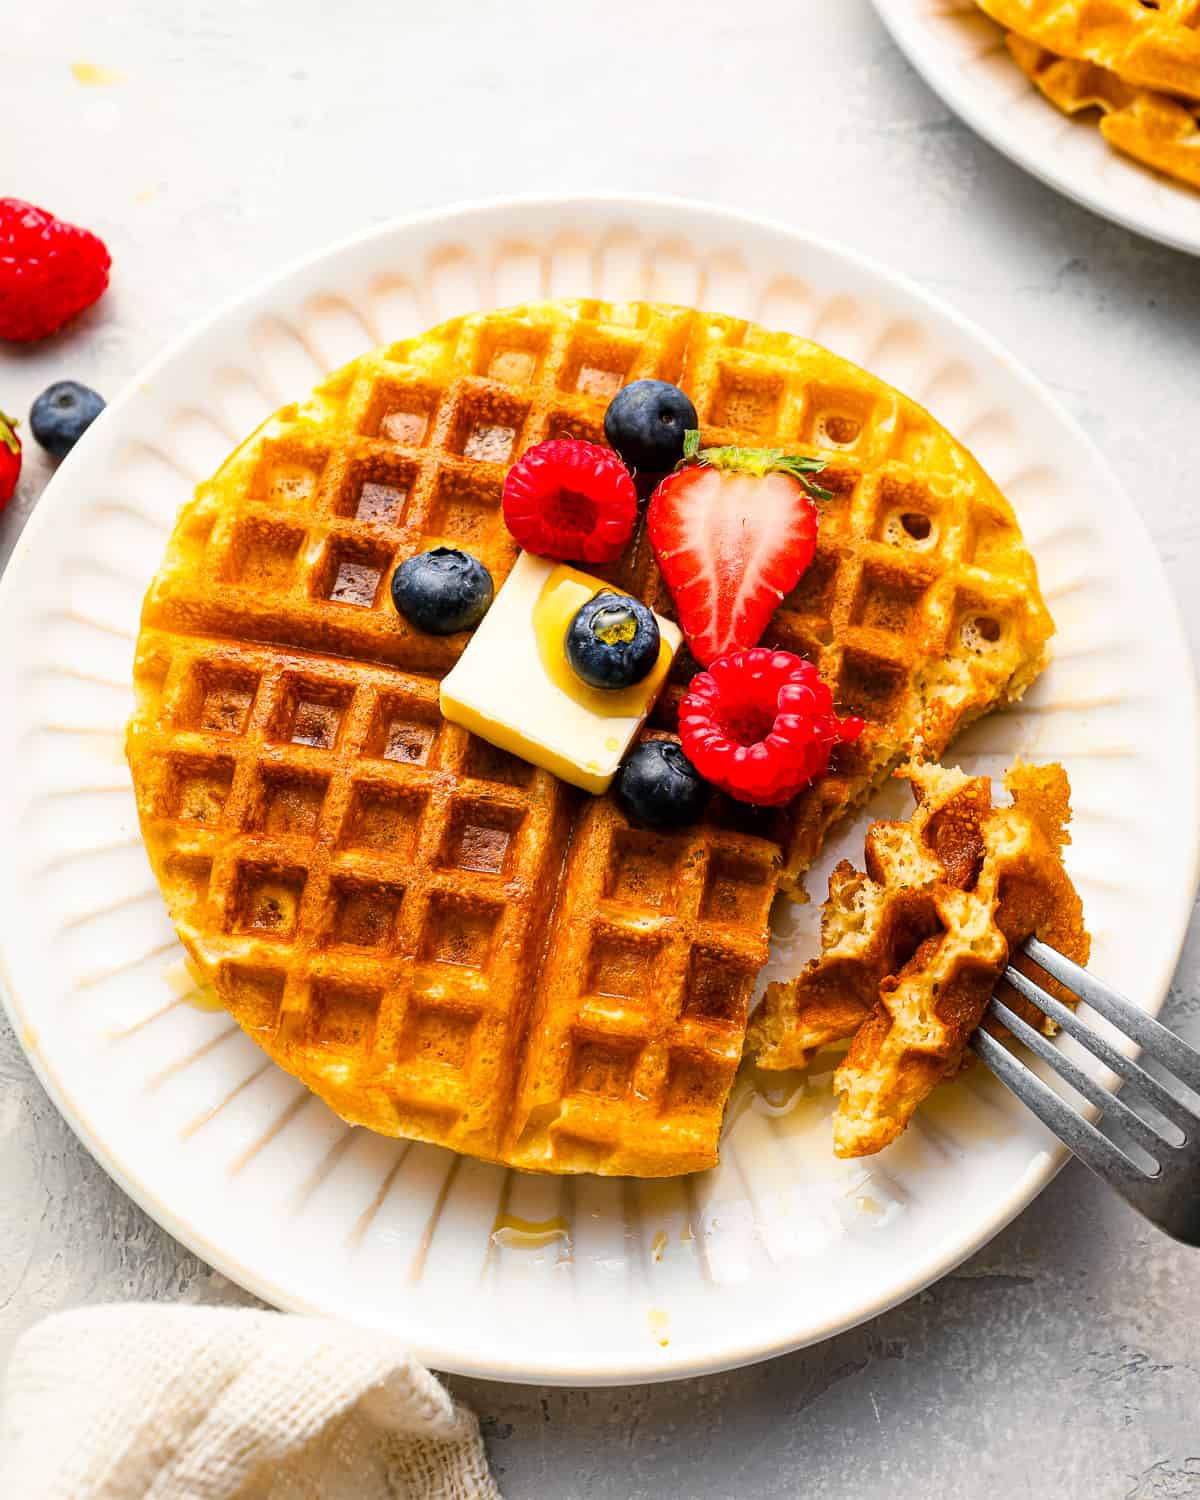 A plate of homemade waffles with berries and a fork.